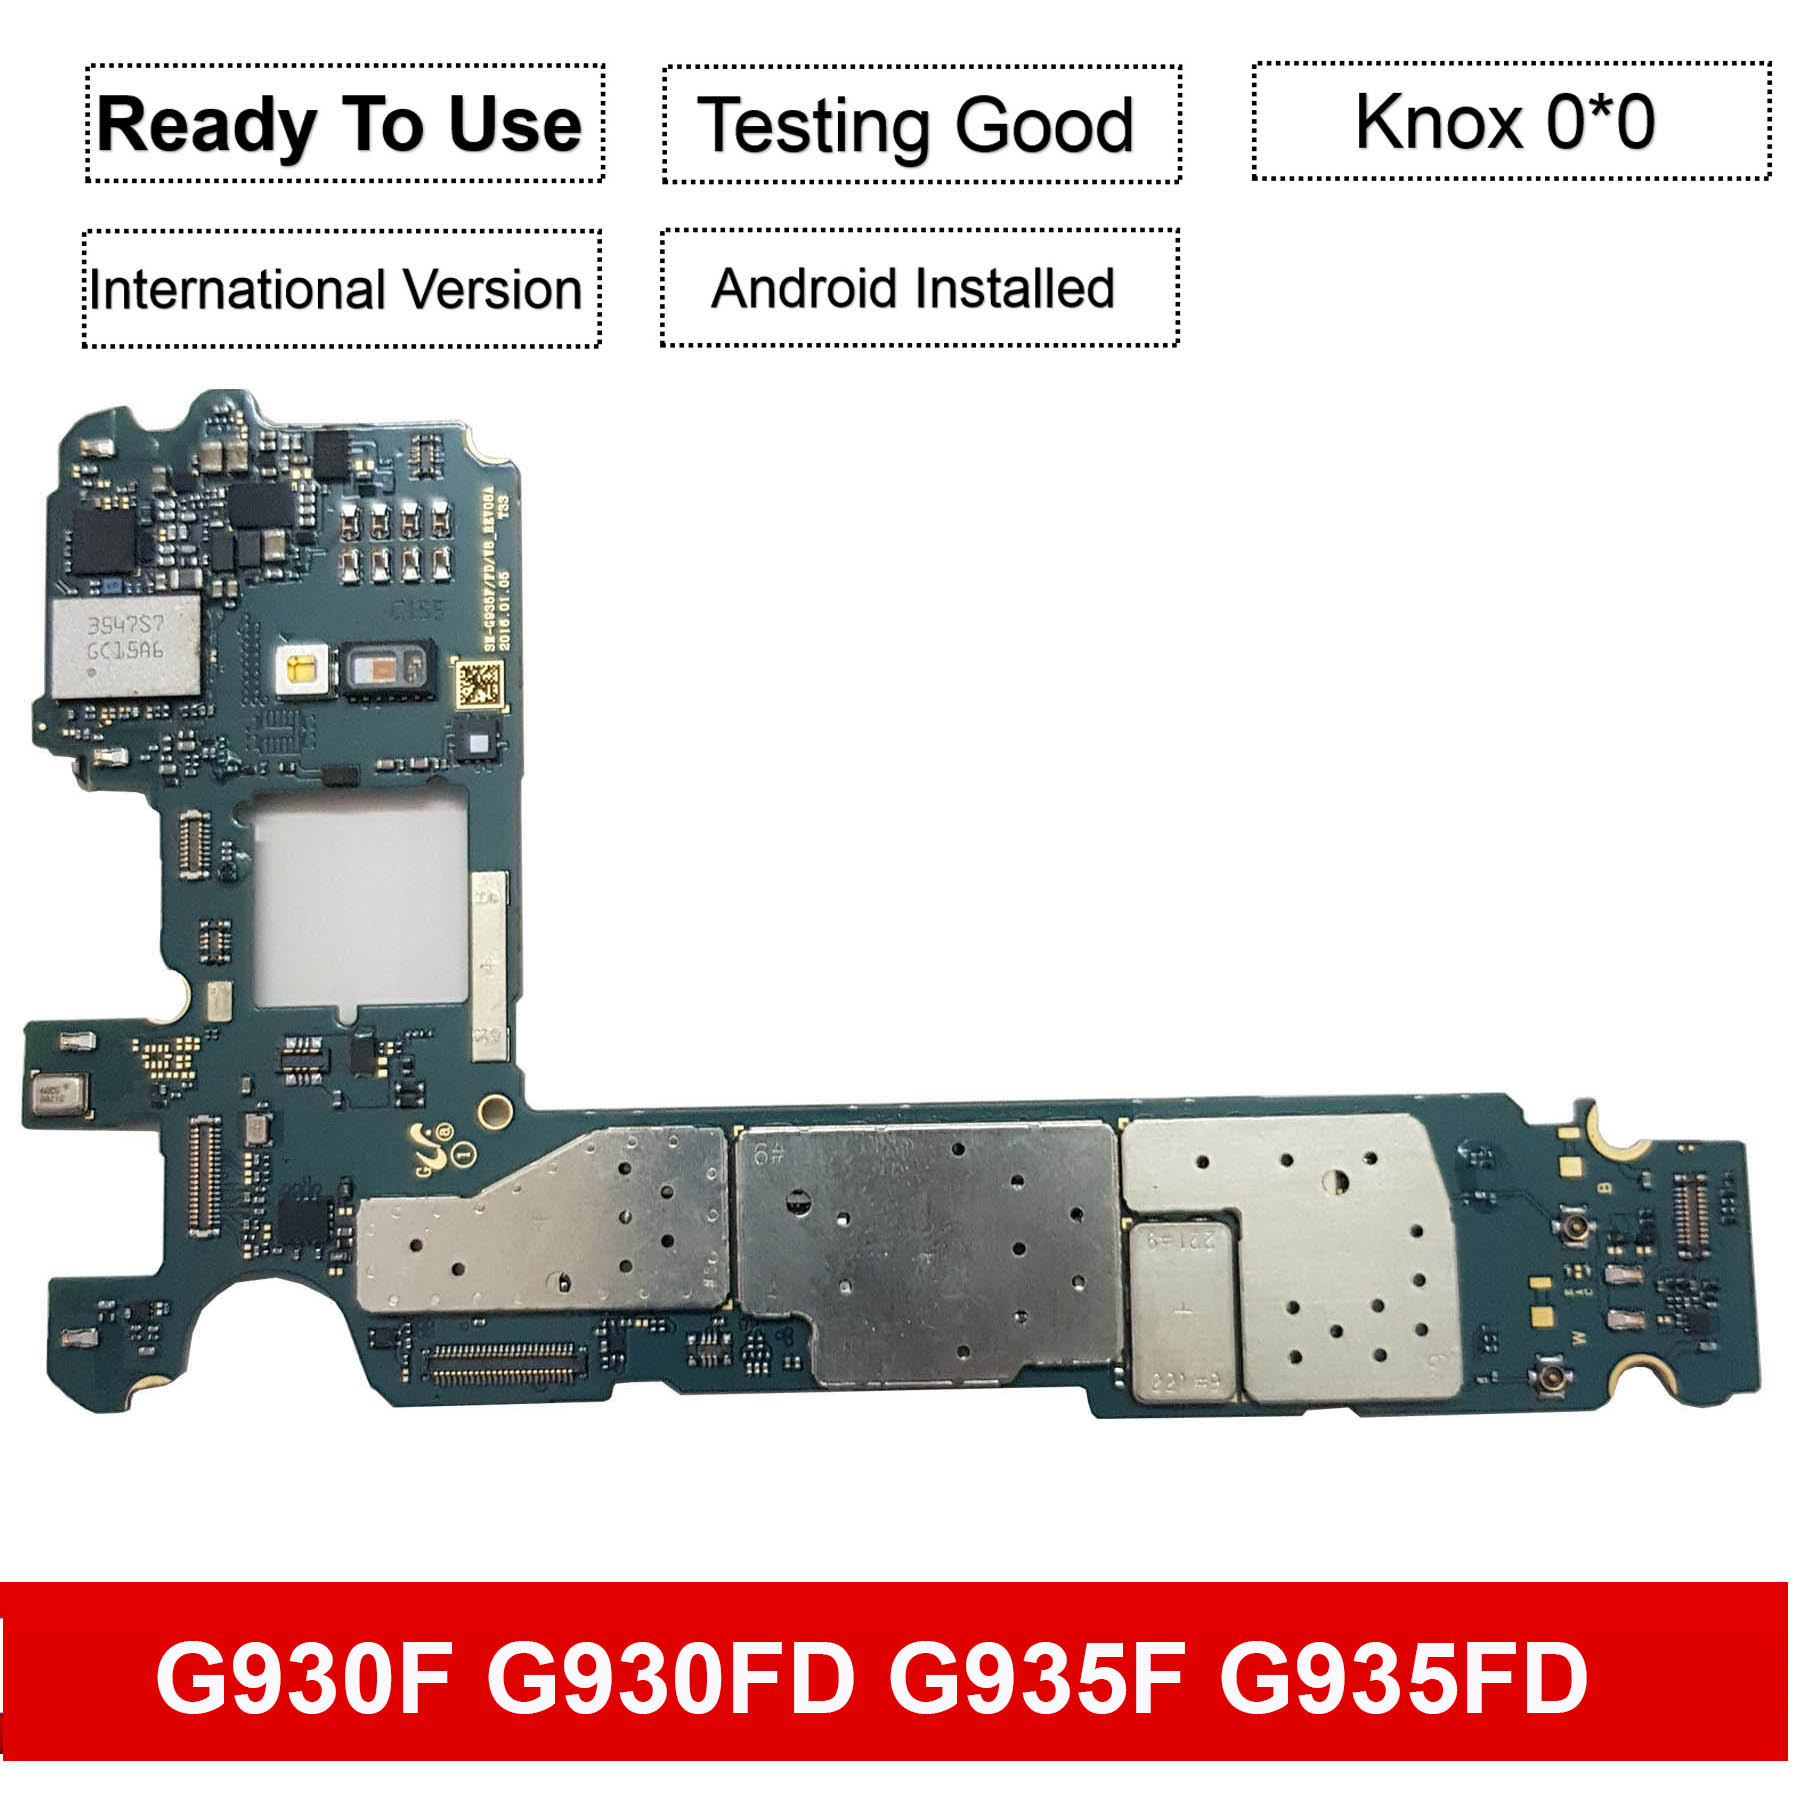 Price history & Review on 32GB For Samsung Galaxy S7 edge G935FD G935F S7 G930F Motherboard With Chips IMEI OS Good Working Logic Board | AliExpress Seller - myphoneparts Store | Alitools.io